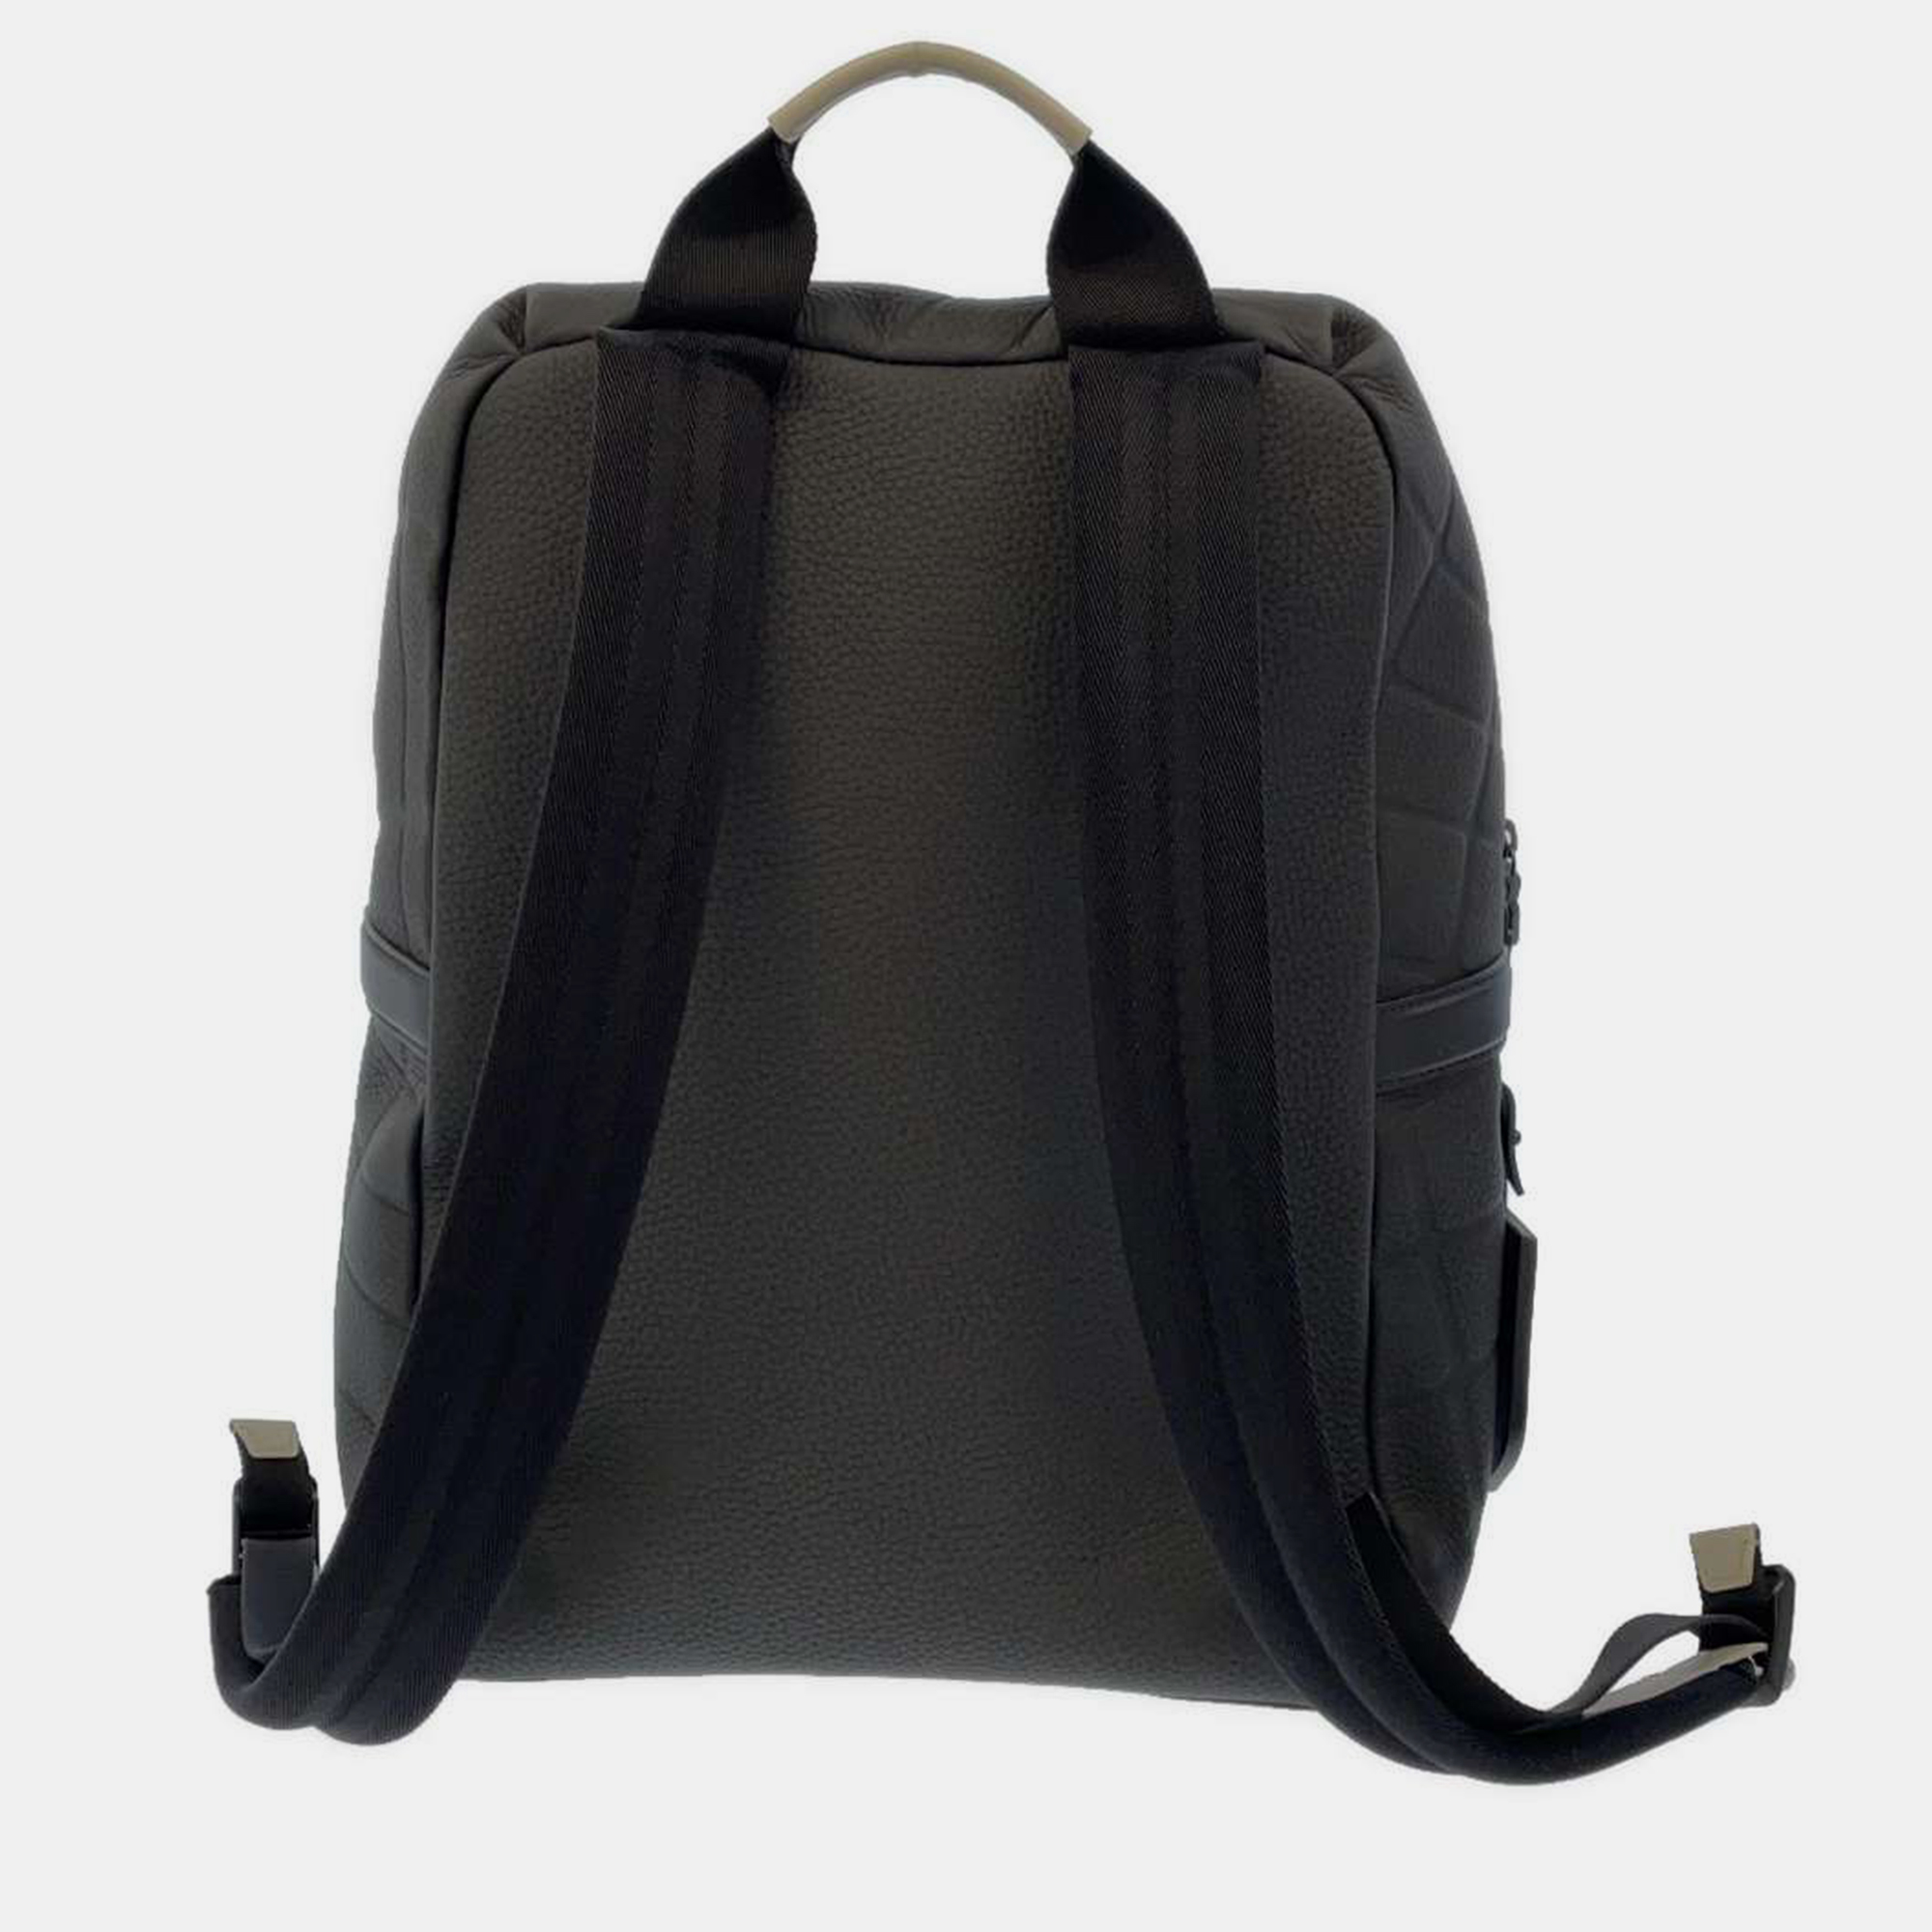 LOUIS VUITTON  Taurillon Leather Discovery Backpack